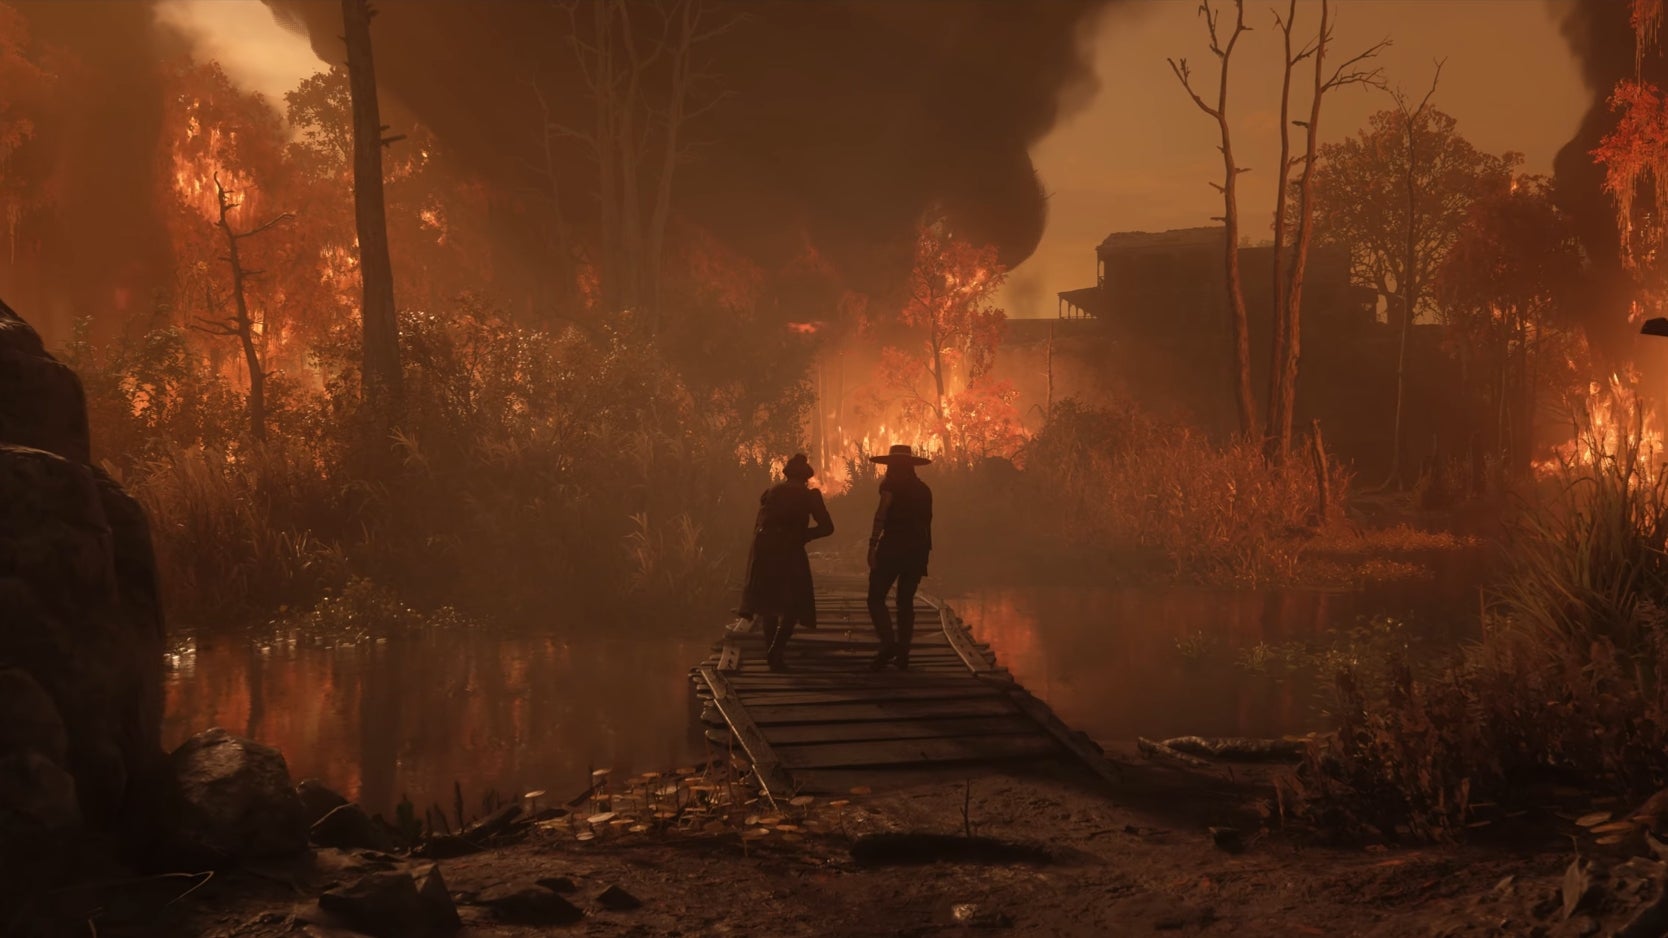 Two cowboys walk along a bridge in a swamp that is on fire